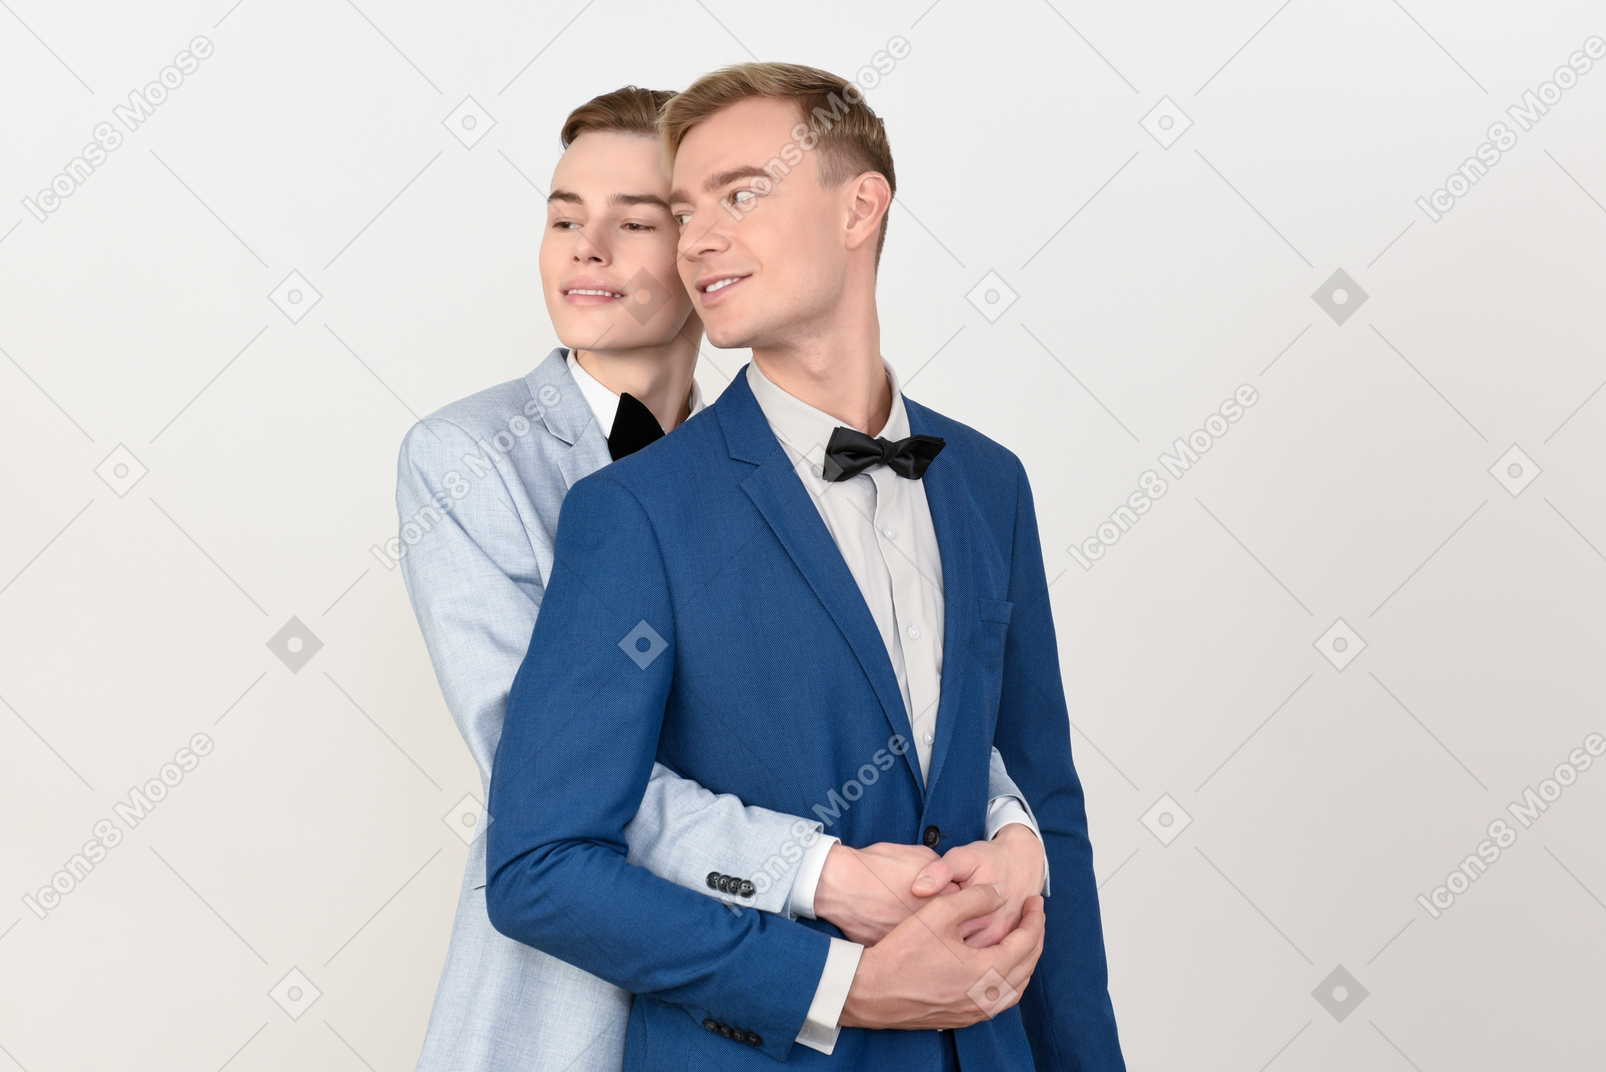 Two handsome young men on their wedding day